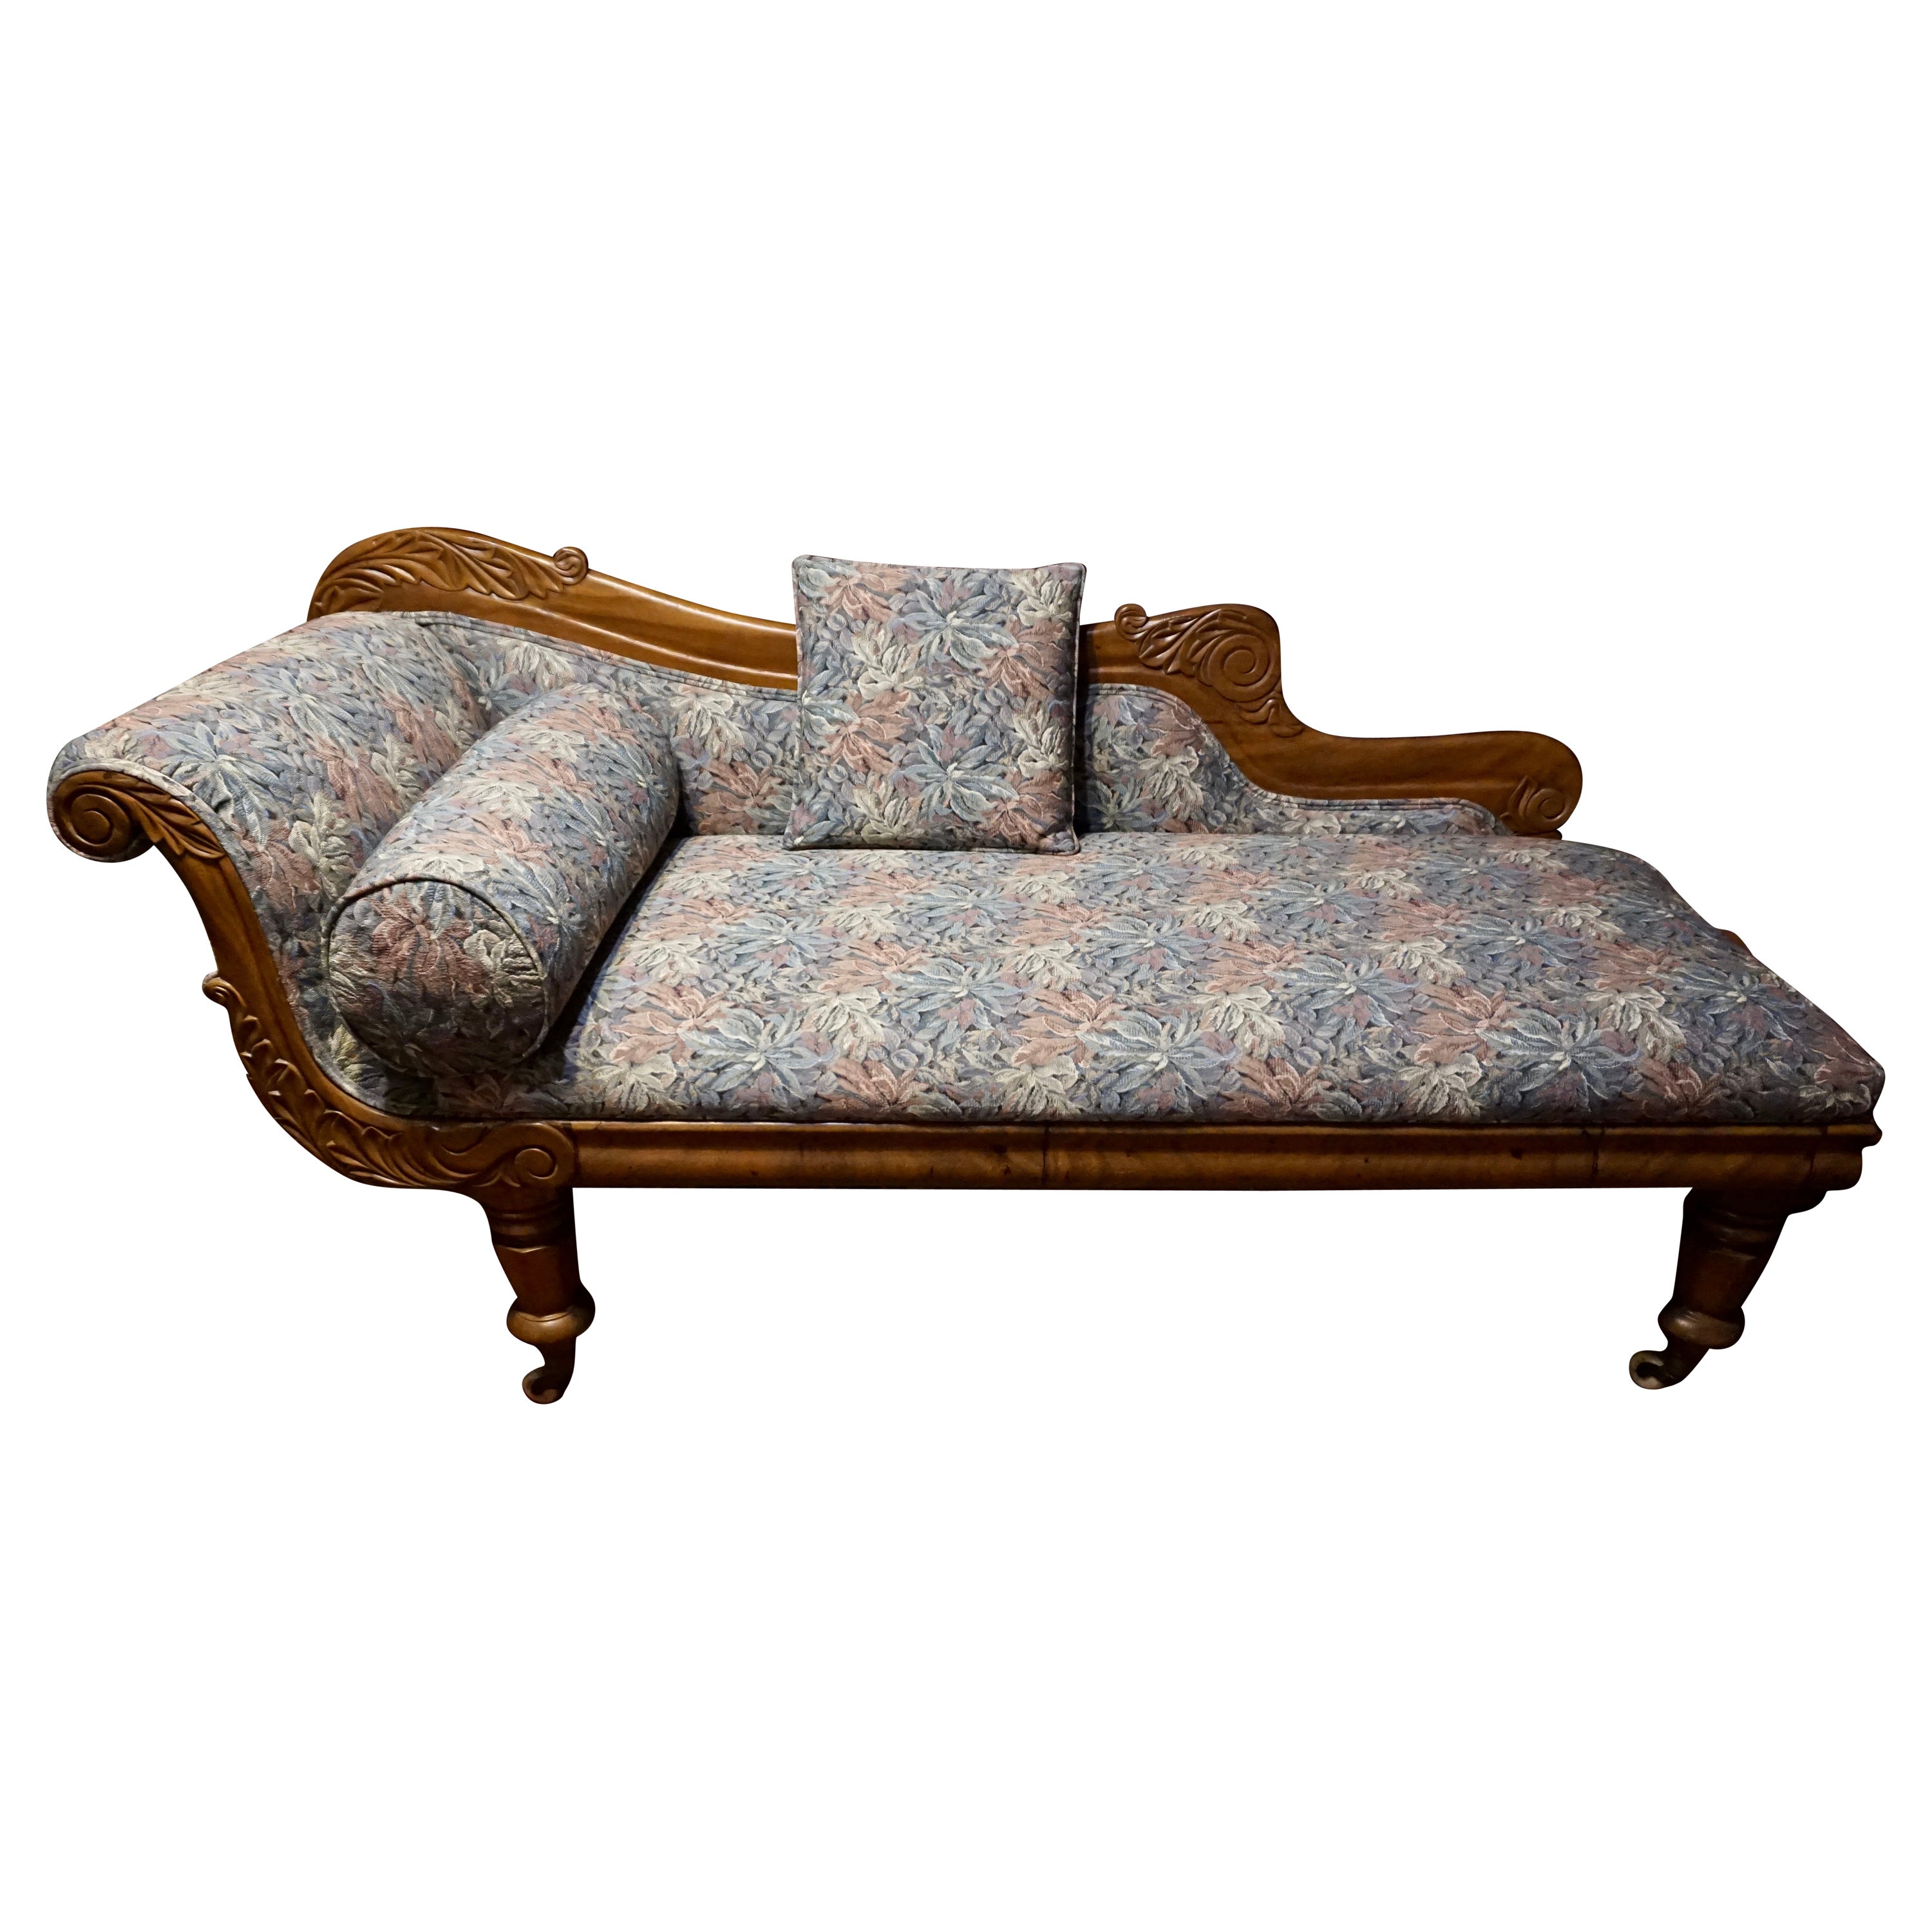 English Mahogany Hand Carved Victorian Chaise Lounge on Porcelain Casters  For Sale at 1stDibs